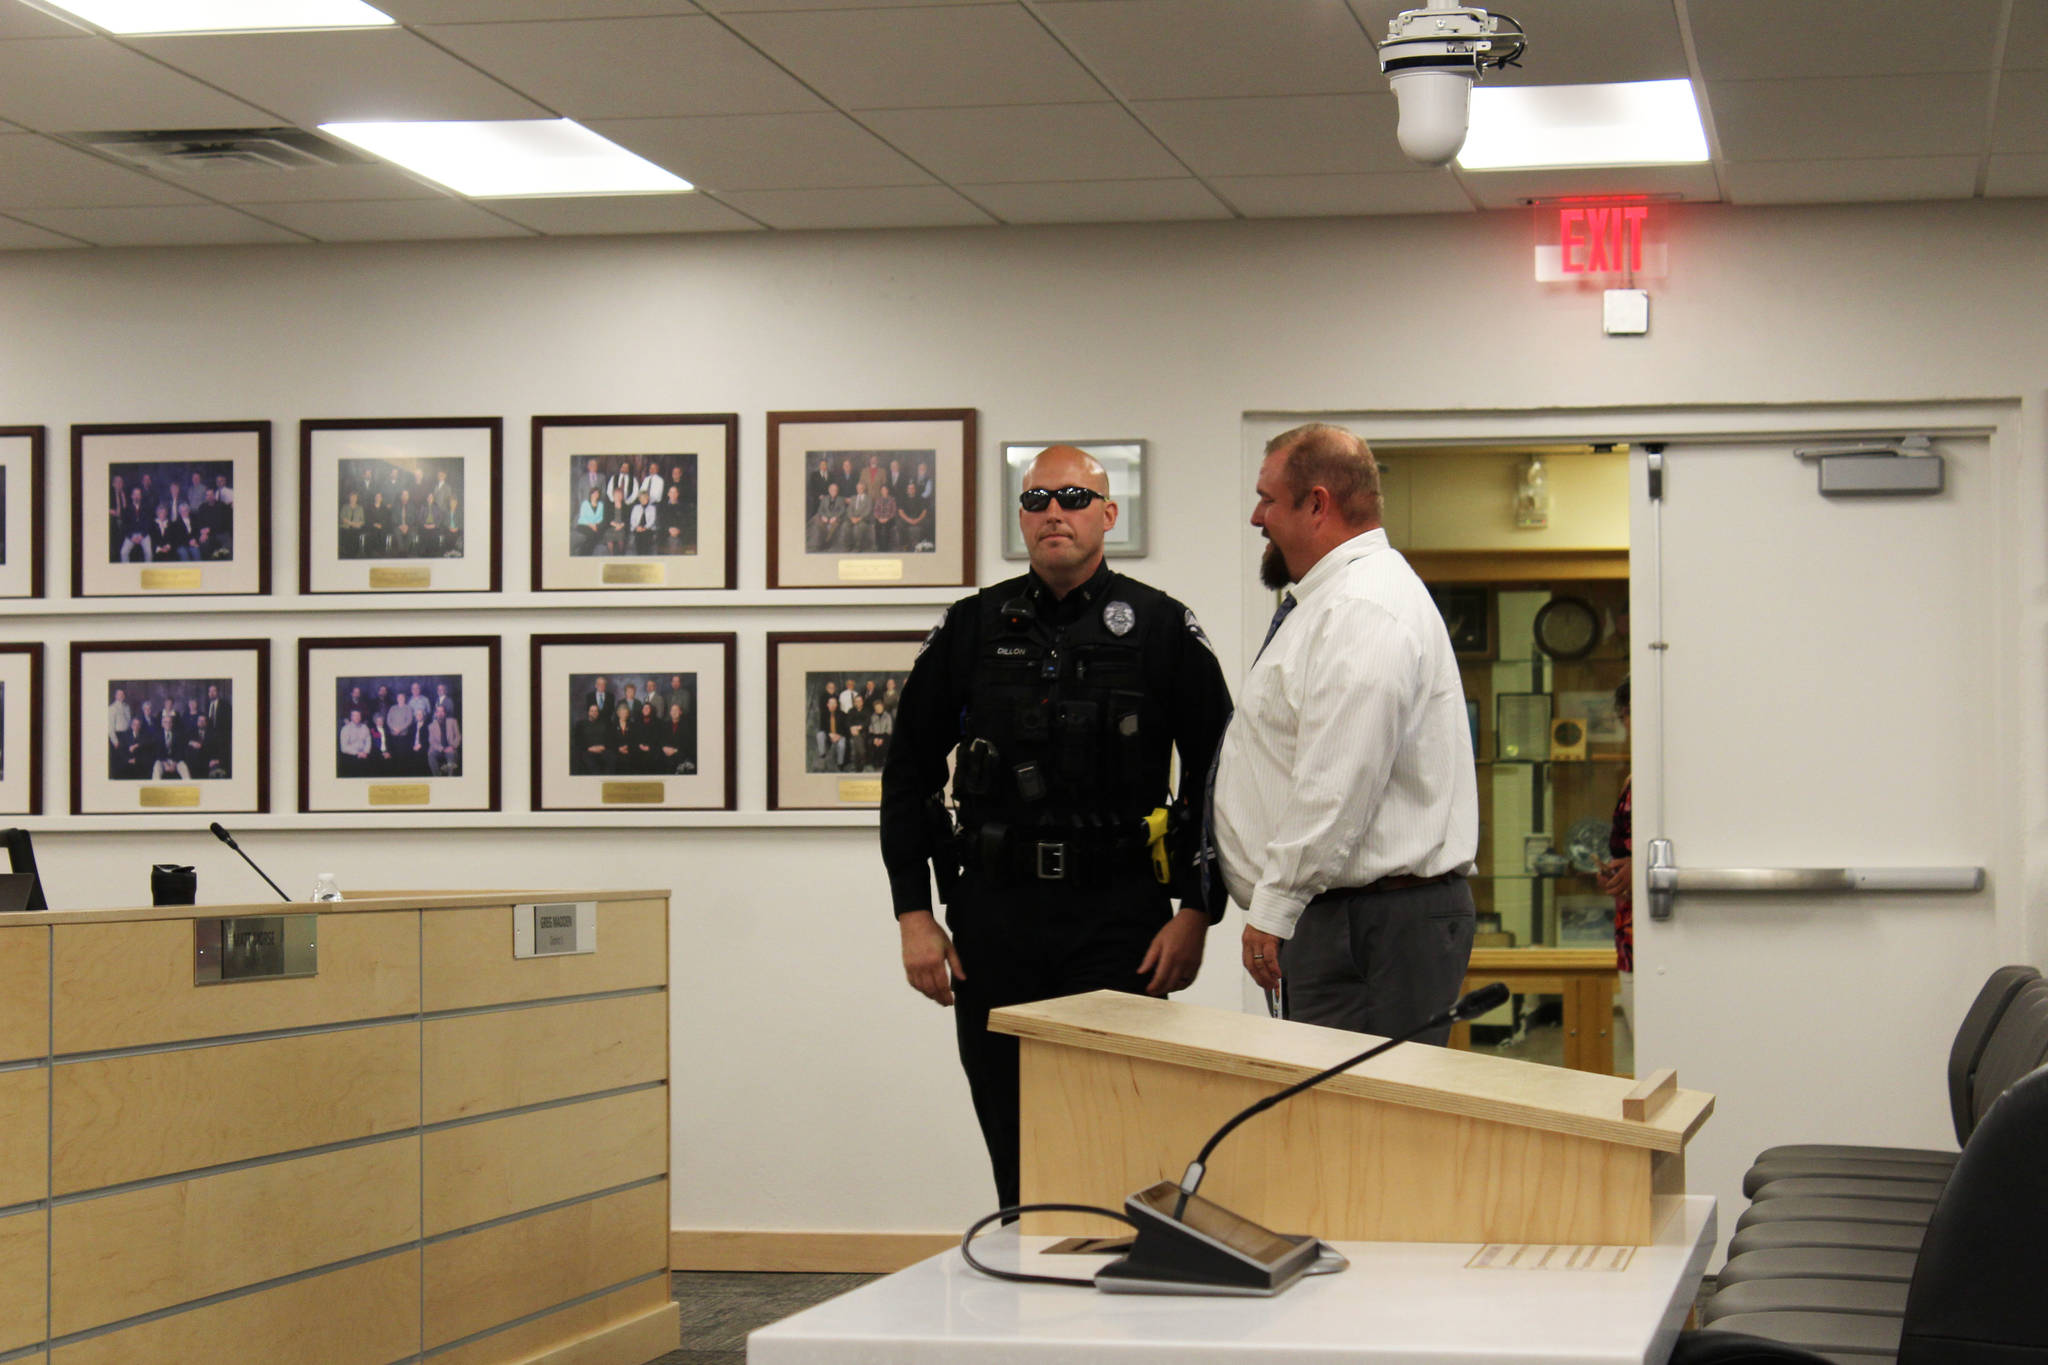 Soldotna Police Department Officer Victor Dillon speaks with KPBSD Director of Secondary Education Tony Graham at the George A. Navarre Borough Admin building on Monday, August 2, 2021 in Soldotna, Alaska. (Ashlyn O'Hara/Peninsula Clarion)